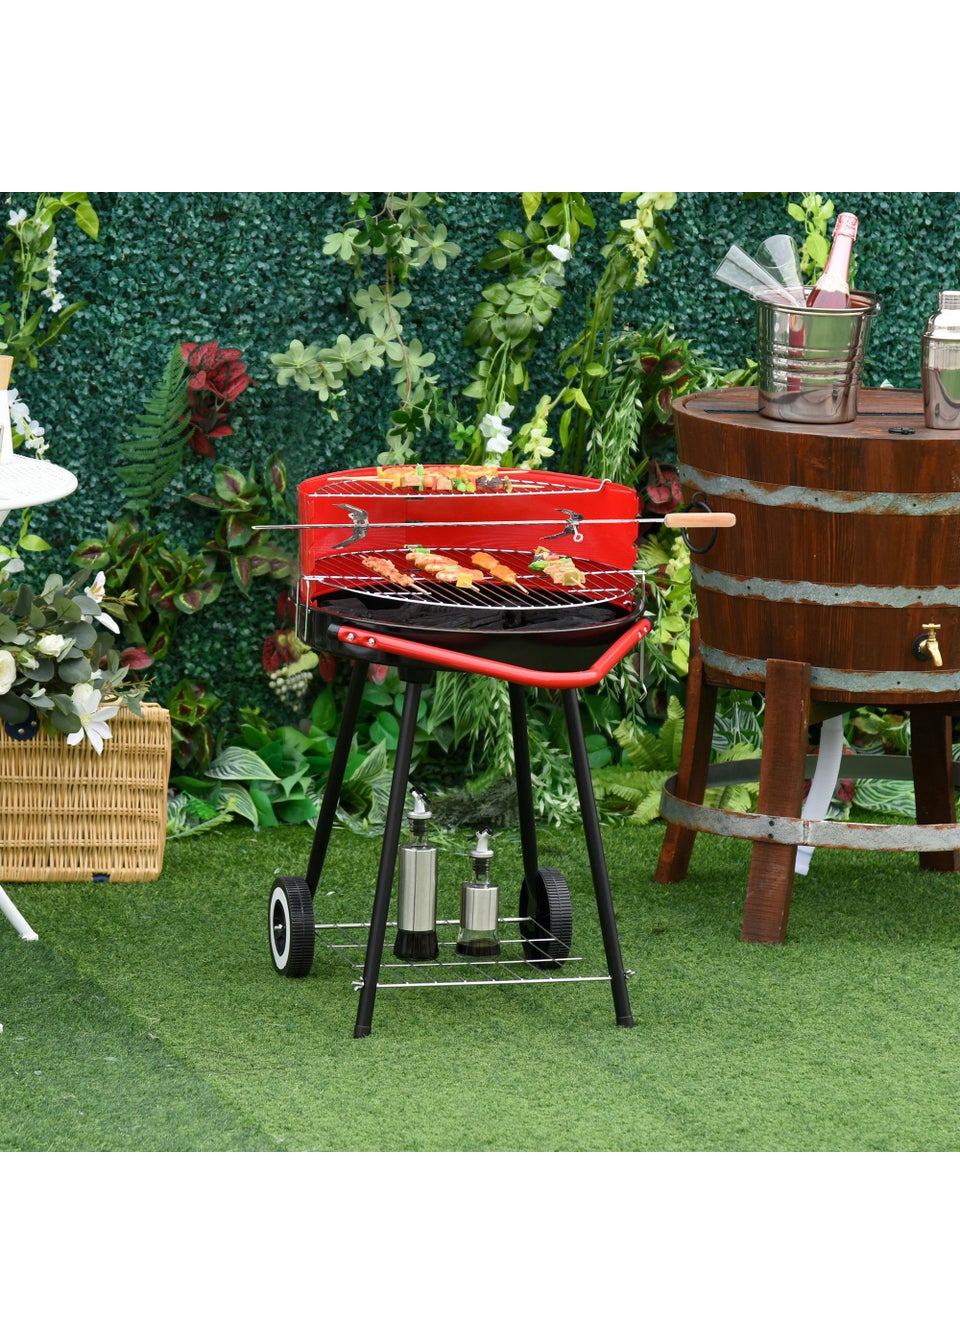 Outsunny Charcoal Trolley Barbecue Grill with Wheels (51cm x 70cm x 75.5cm)